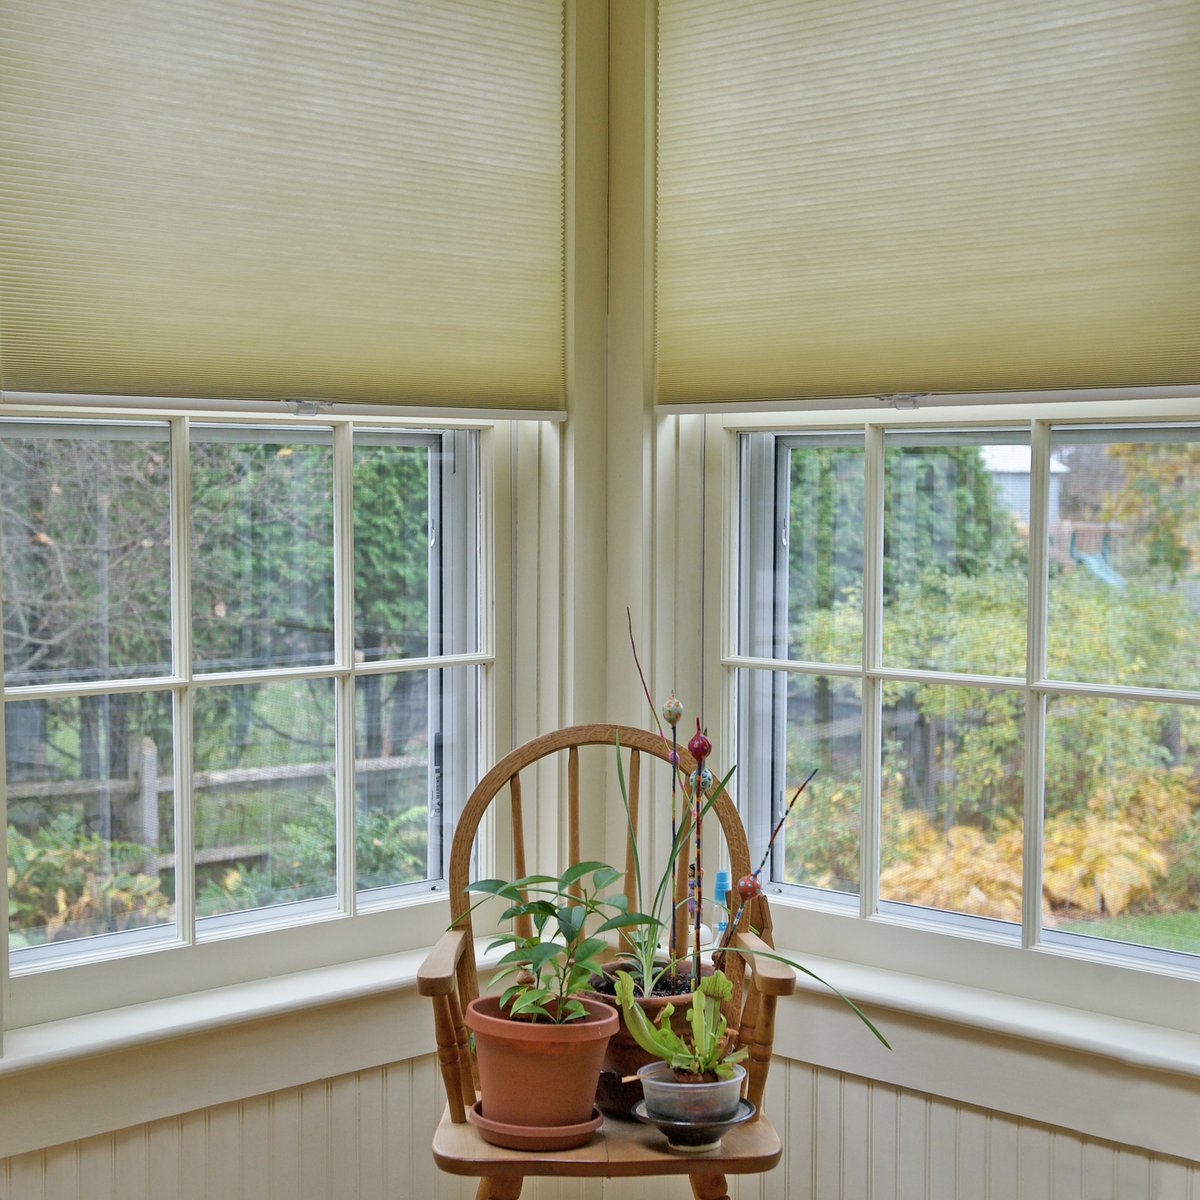 Spring, is that YOU?😍
What a lovely corner in a lovely home in #Underhill.
Our EcoSmart Insulating Cellular Shades in a stunning sunshiny yellow, will brighten your every day.

Our infamous Tier Sale is happening now!
Schedule today! It's Free!
Give us a jingle
802.655.7777